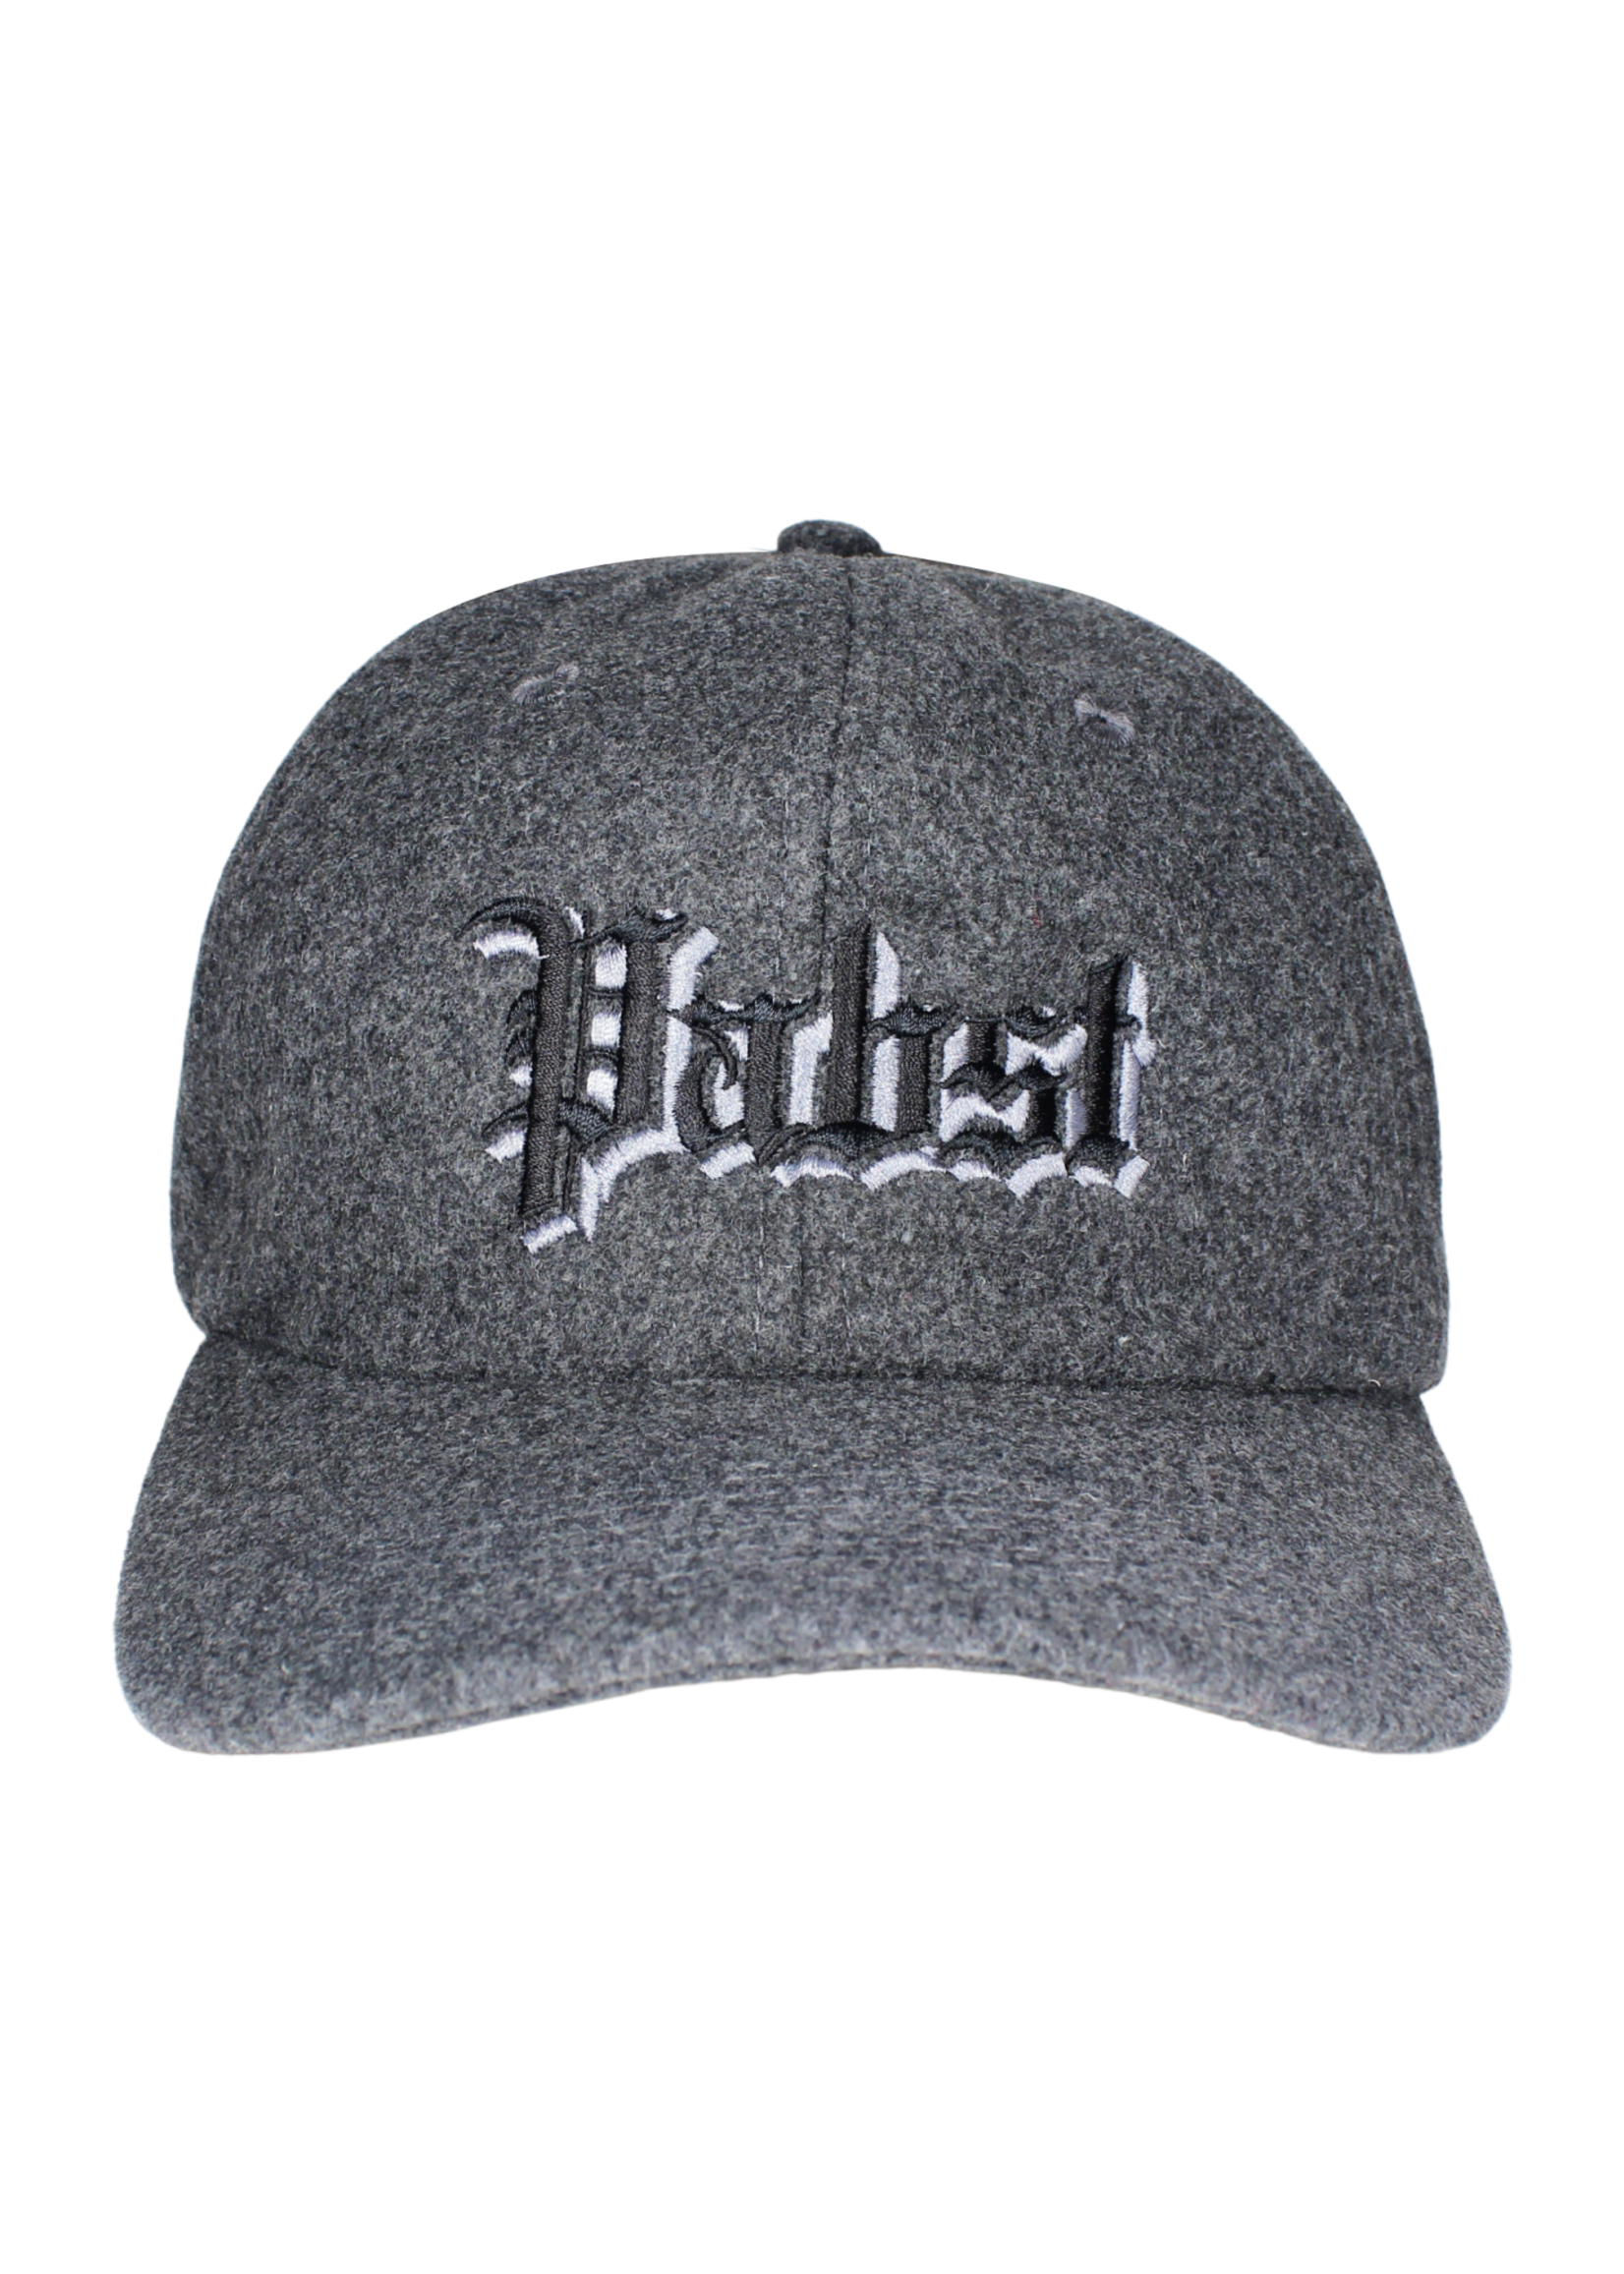 Pabst Pabst Pre-Pro Charcoal Wool Cap